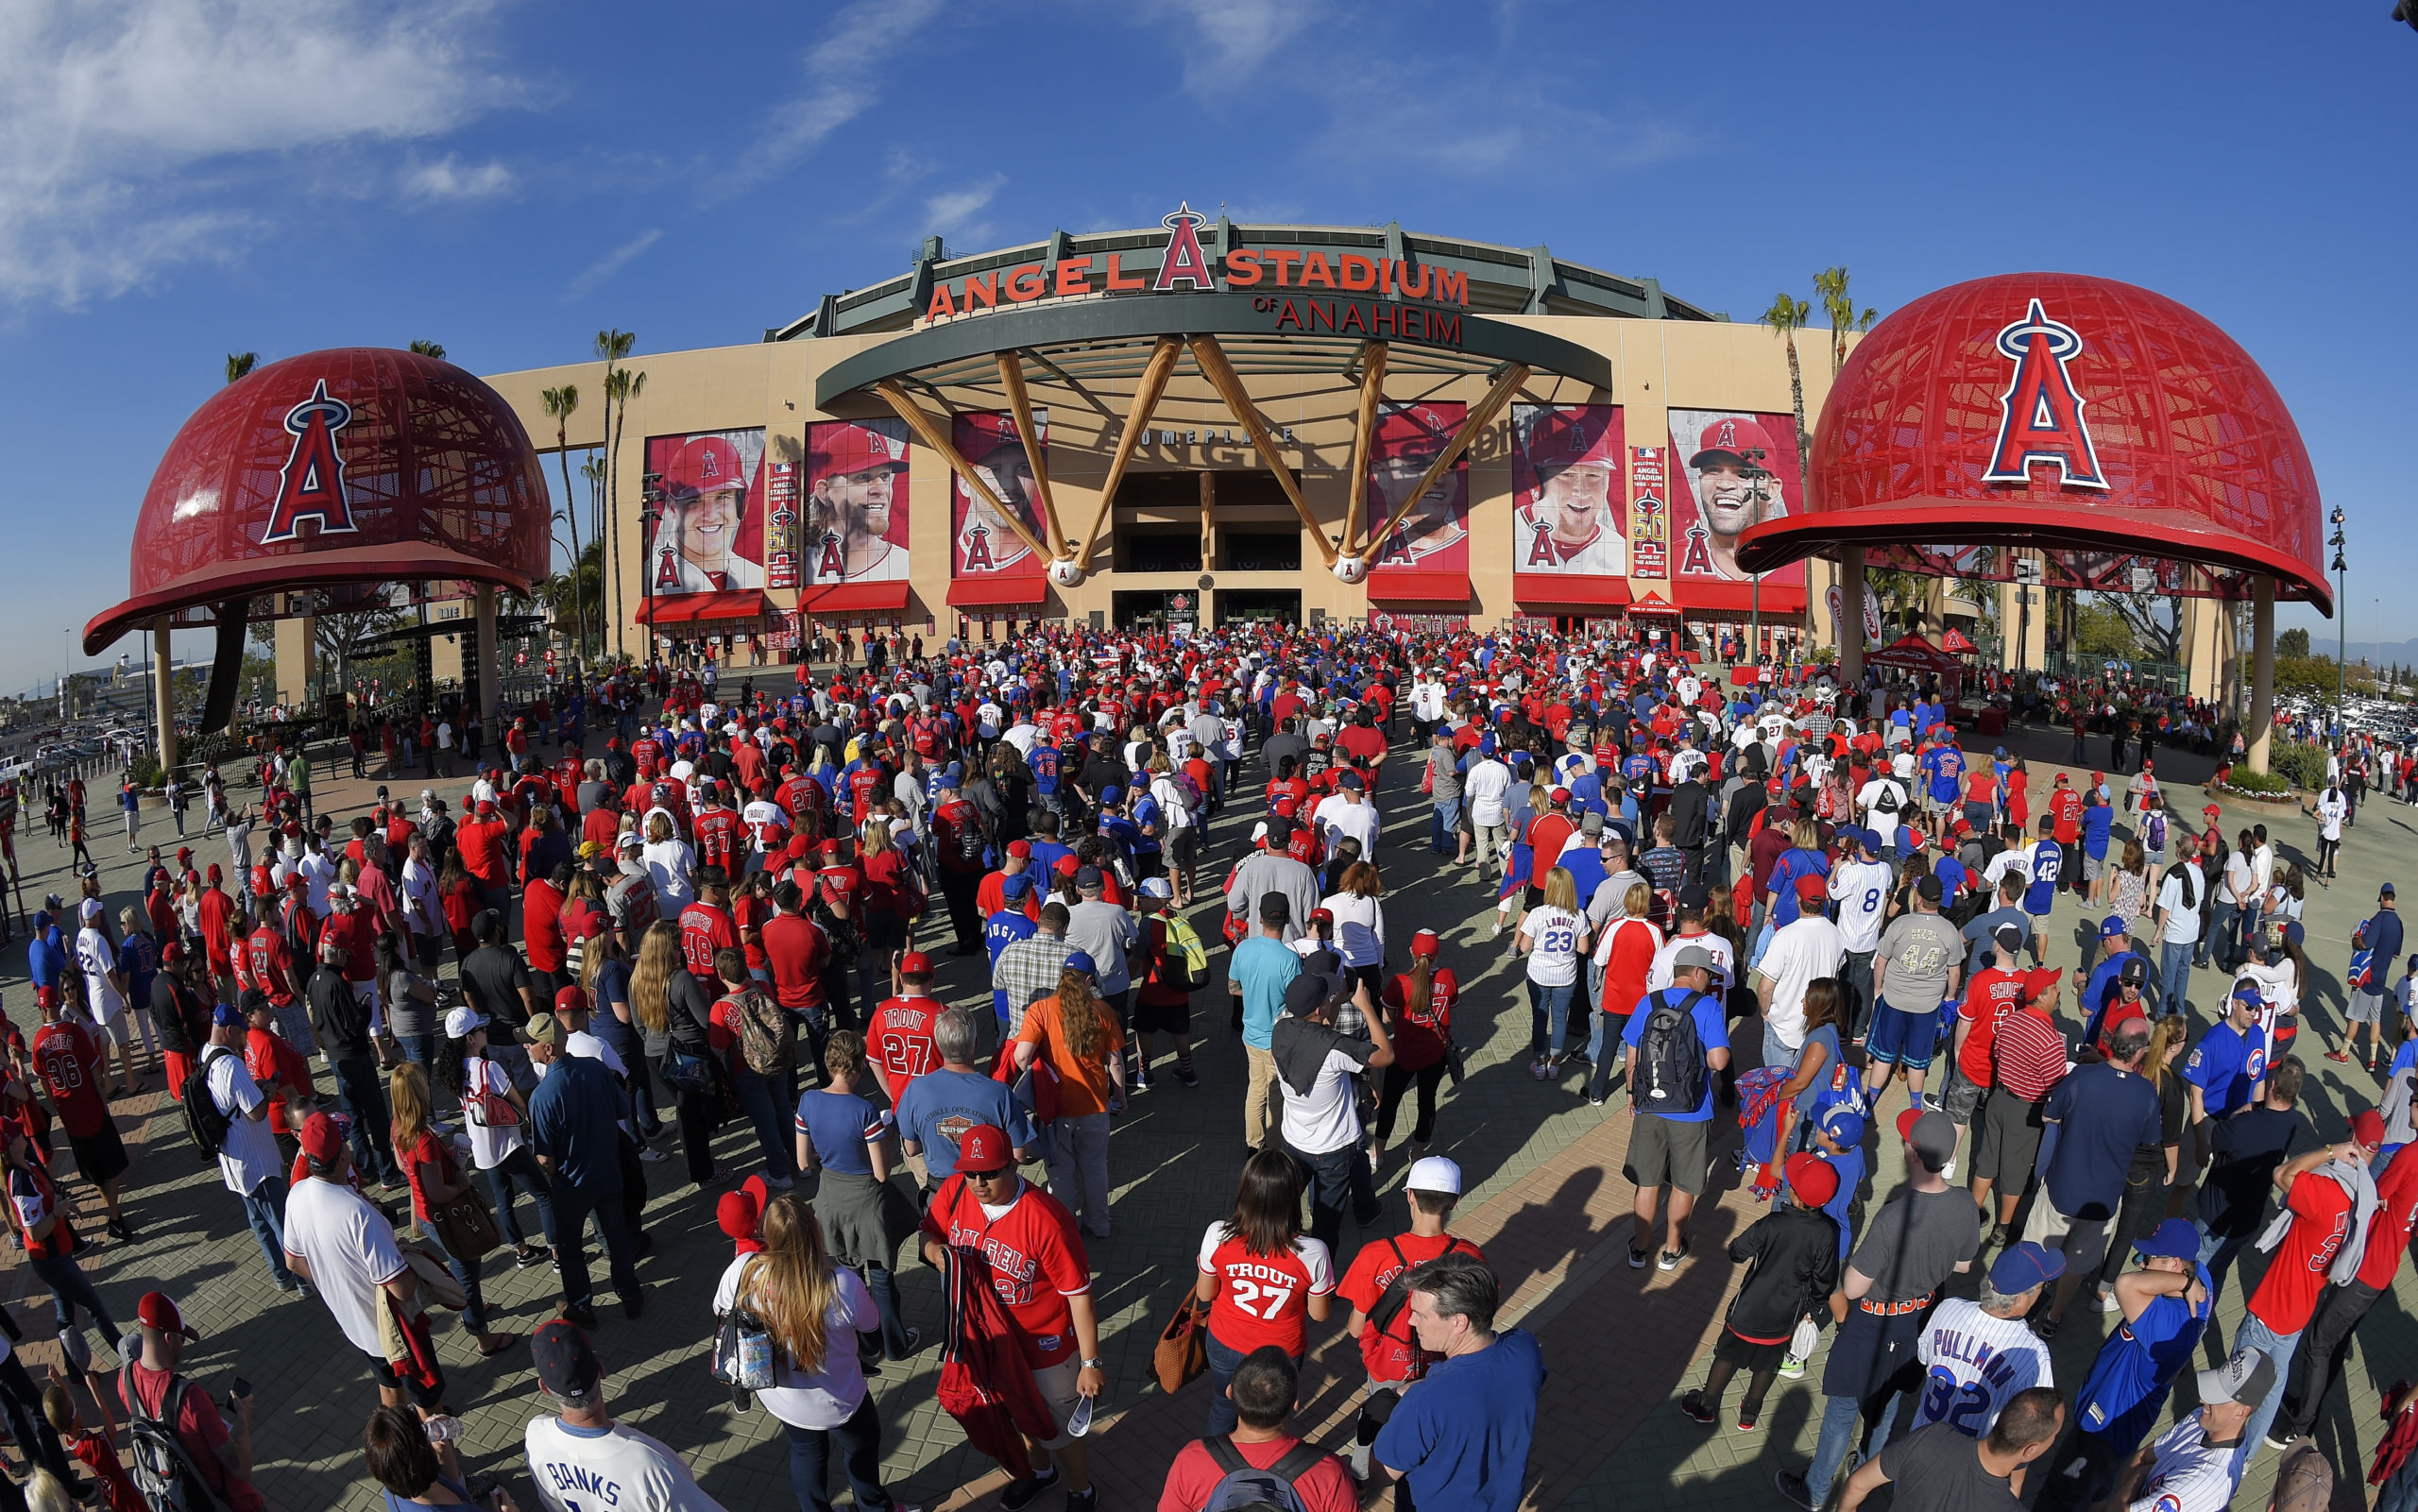 Fans line up outside Angel Stadium in Anaheim, California, for an opening day baseball game between the Los Angeles Angels and the Chicago Cubs on April 4, 2016.